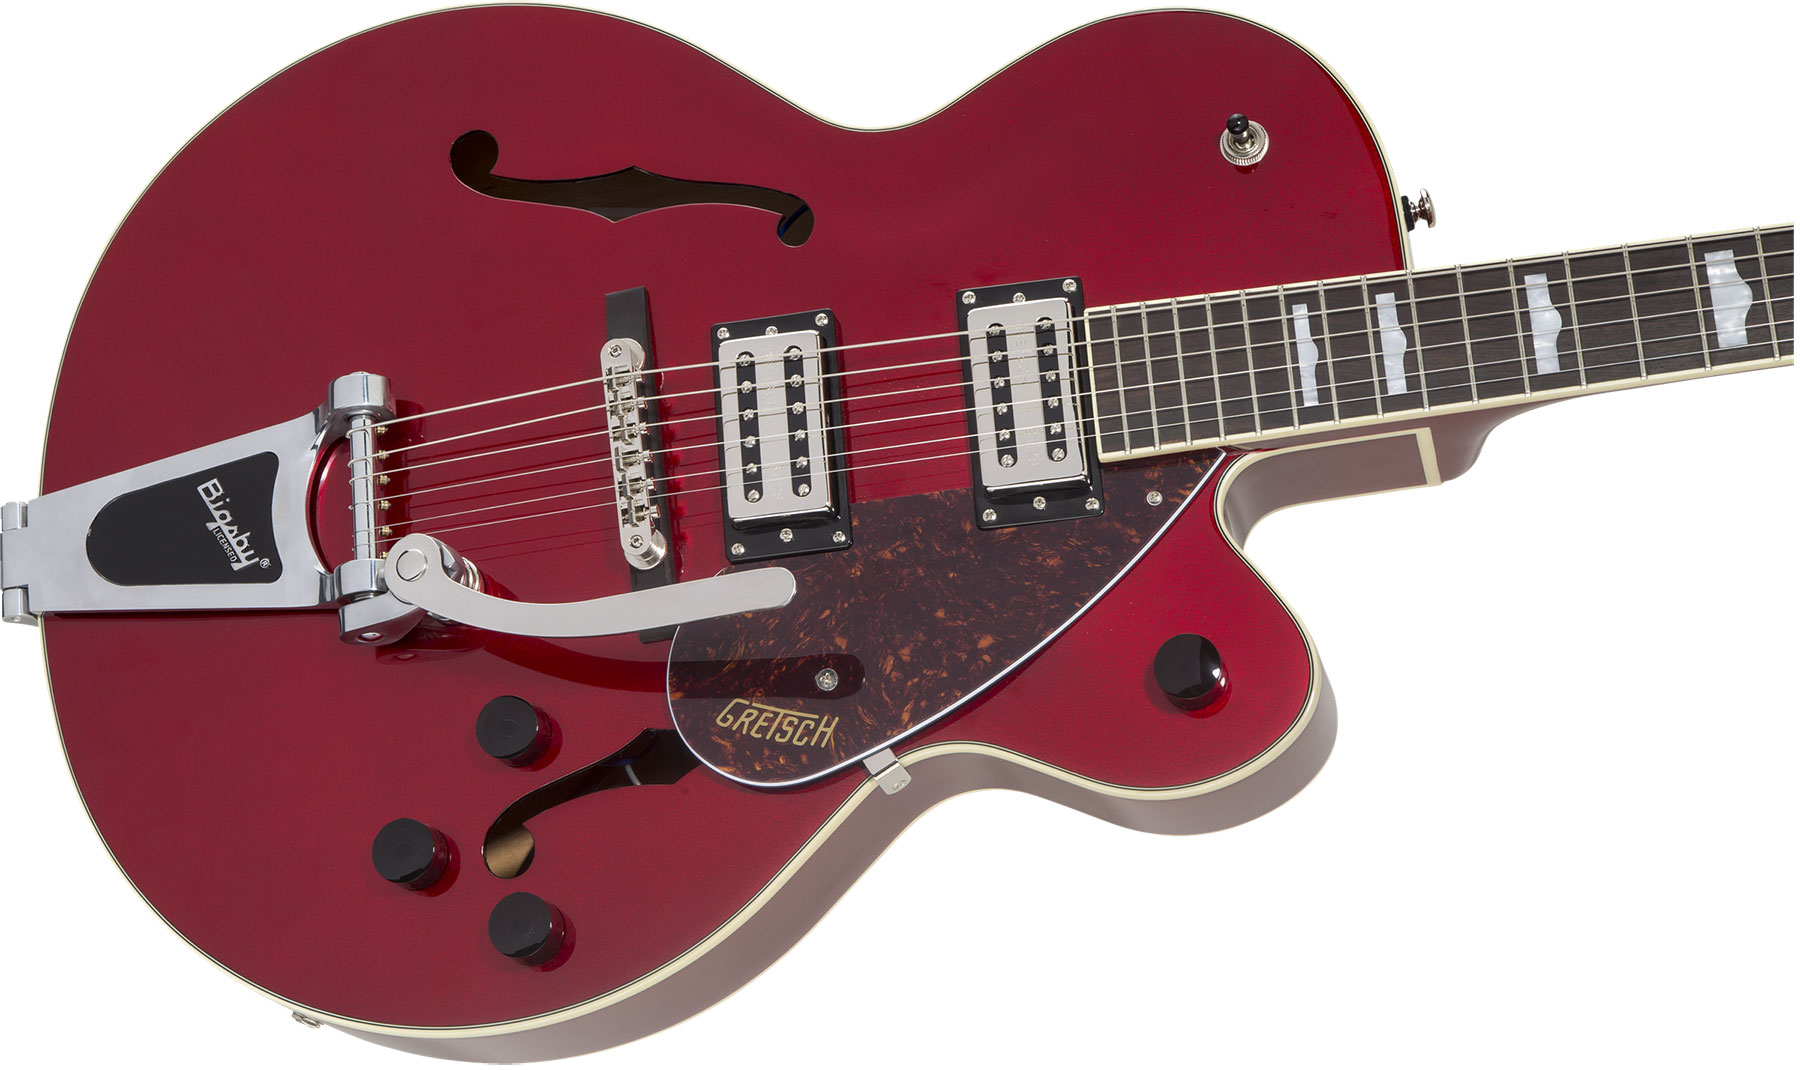 Gretsch G2420t Streamliner Hollow Body Bigsby Hh Trem Lau - Candy Apple Red - Guitare Électrique 1/2 Caisse - Variation 2